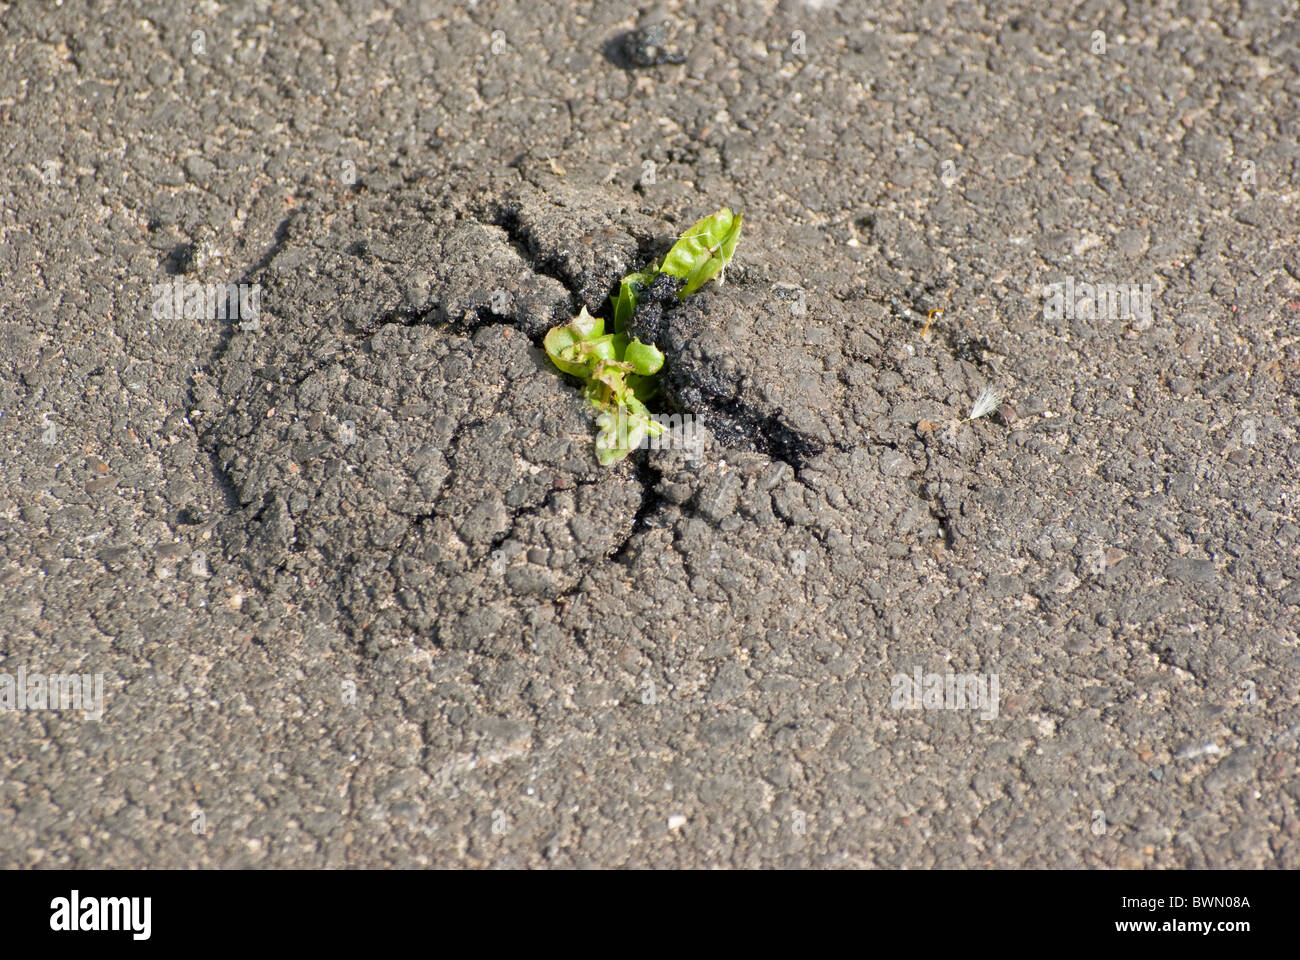 Dandelion forcing its way through tarmac Stock Photo